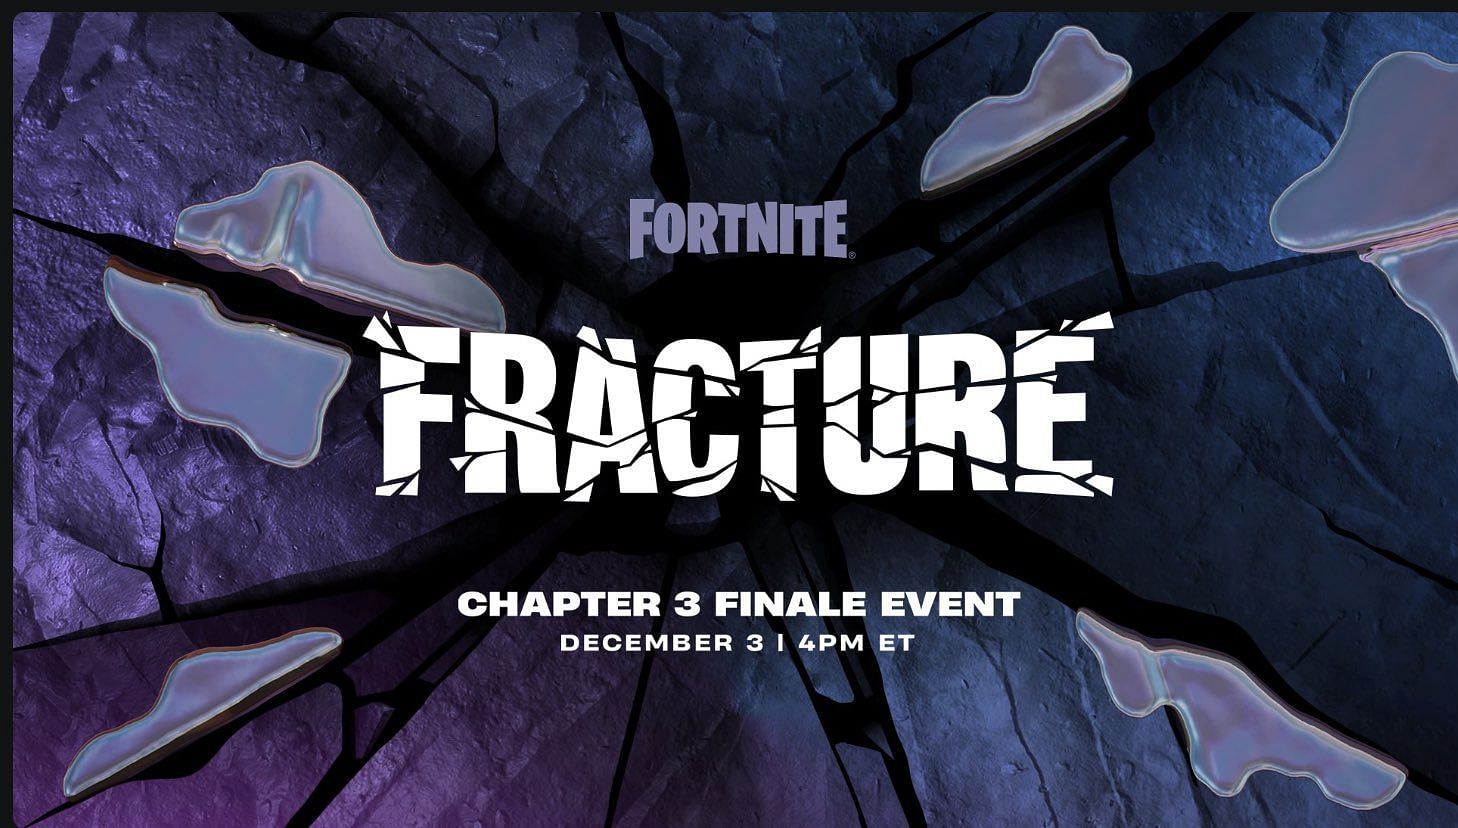 The latest Fortnite live event leak may not be legitimate (Image via Epic Games)